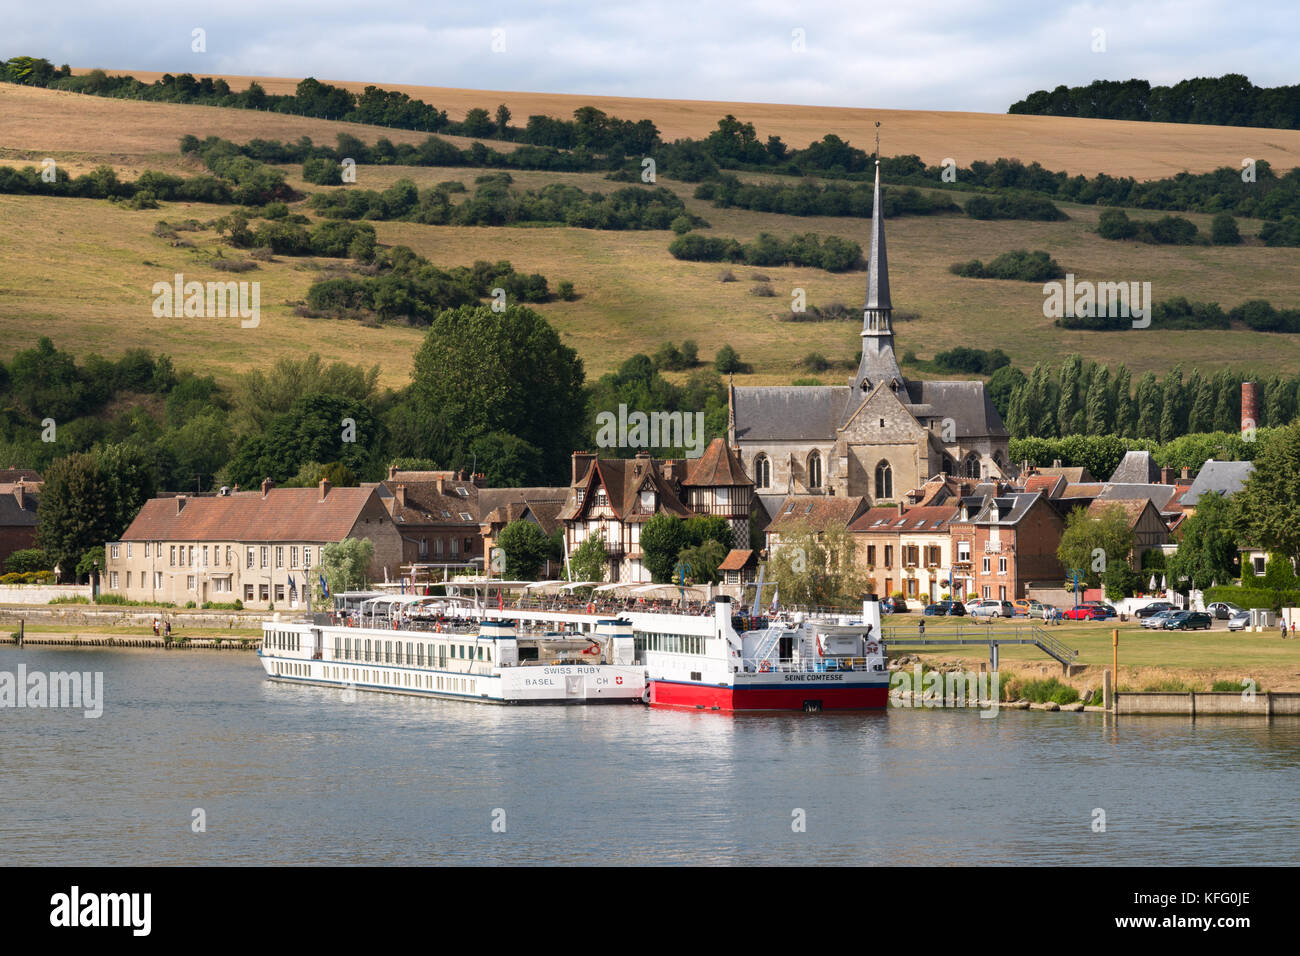 River cruise ships Swiss Ruby and Seine Comtesse moored at Petit Andely, Les Andelys, Normandy, France, Europe Stock Photo